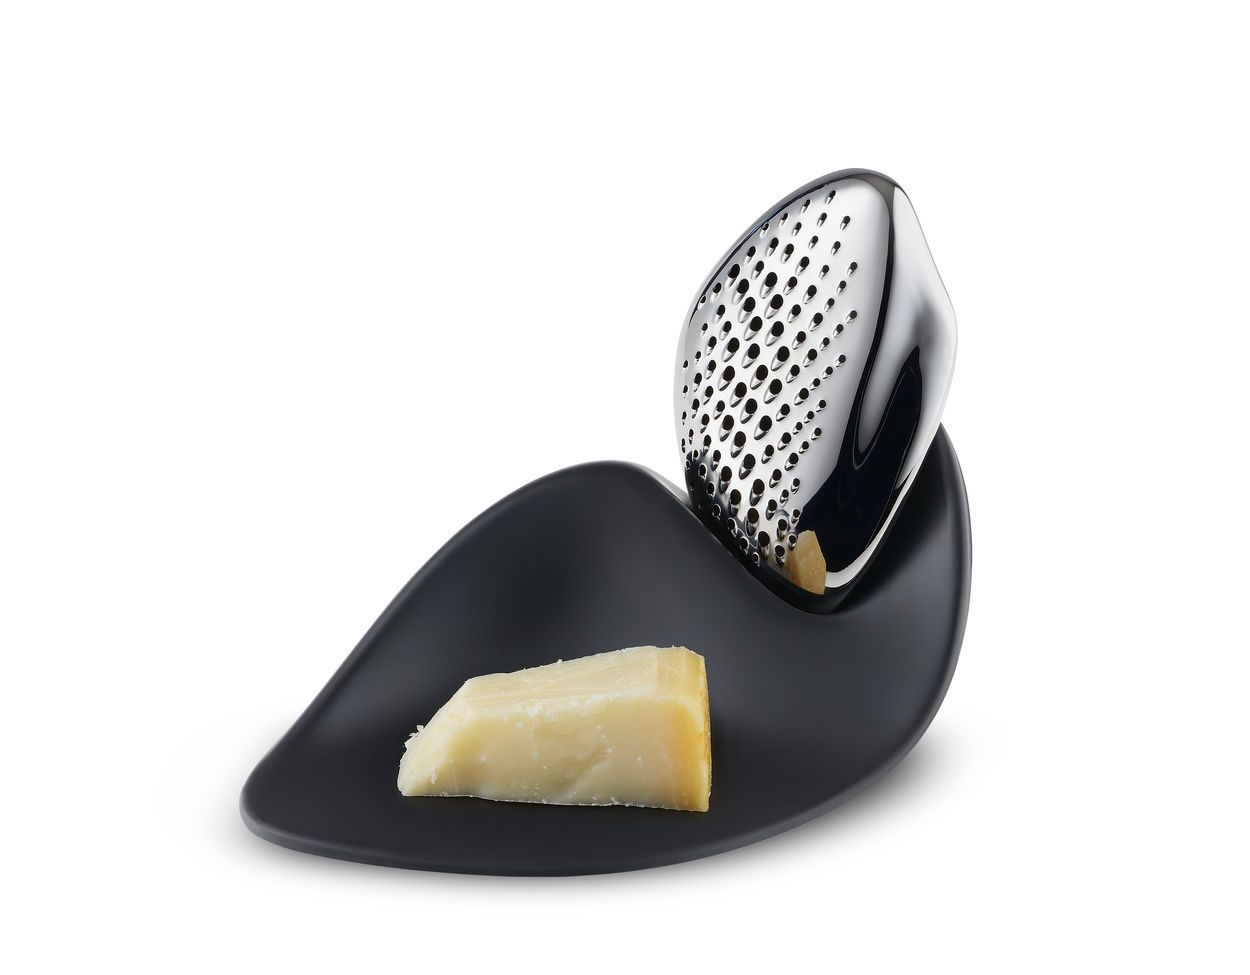 Alessi Zahid Forma Cheese Grater